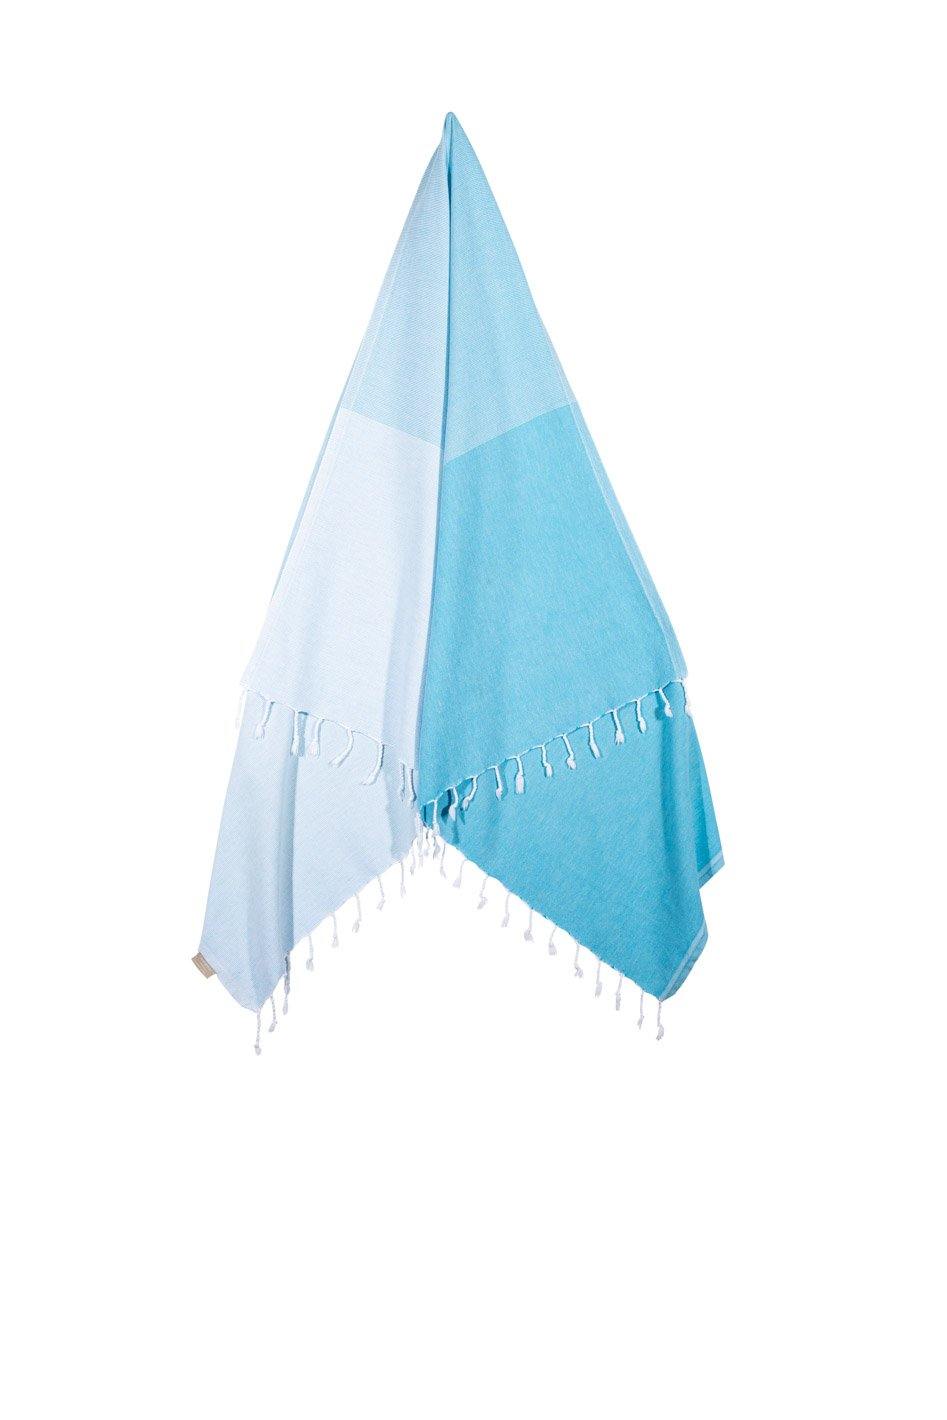 Dune - Turquoise Lightweight Quick Drying Towel Hanging 